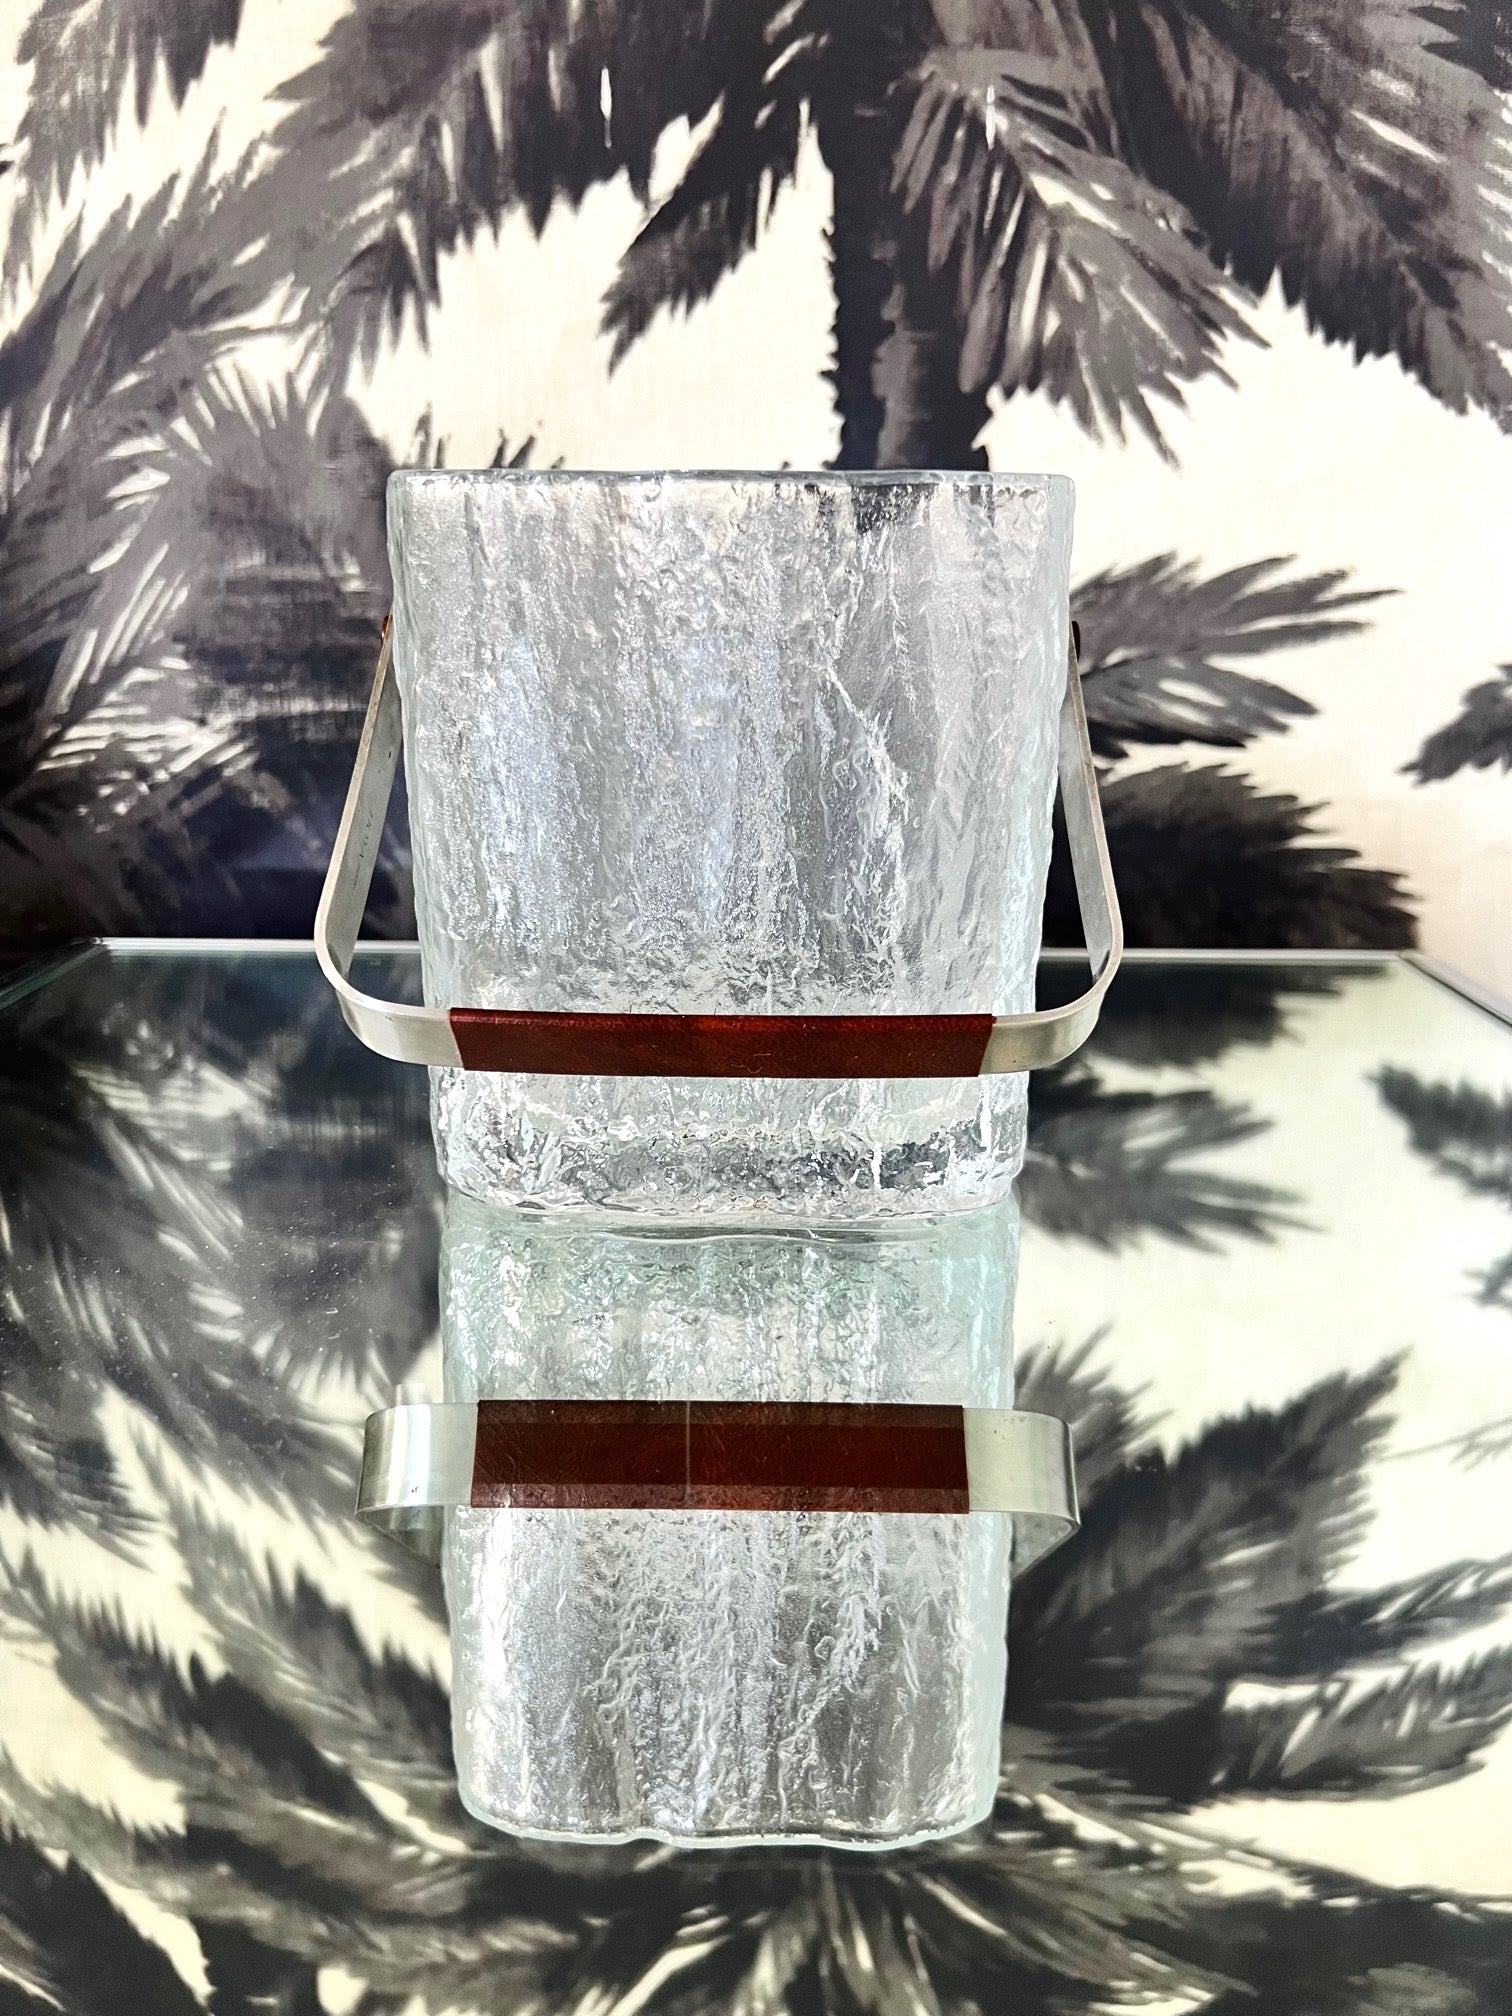 Mid-Century Modern Japanese personal size ice bucket comprised of thick chunky glass with polished edges and translucent base. The vintage bucket has a textured ice cube design and features a stainless steel handle wrapped in brown stitched